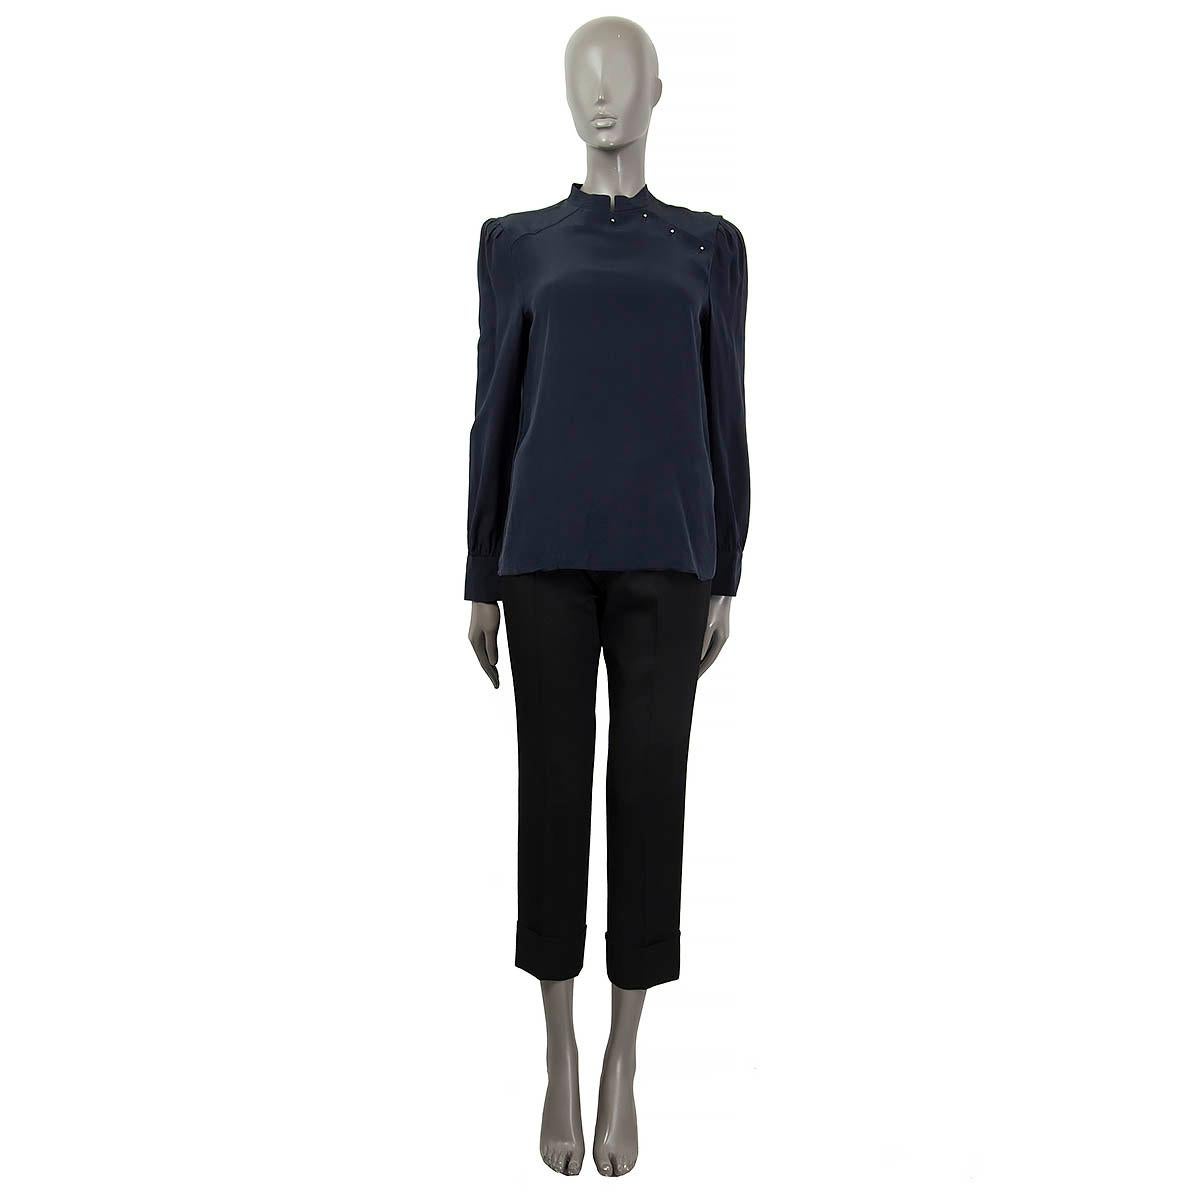 100% authentic Prada high collar long sleeve blouse in midnight blue silk (assumed cause tag is missing). Features a self tie bow at the back neck and buttoned cuffs. Opens with four buttons at the neck. Unlined. Has been worn and is in excellent